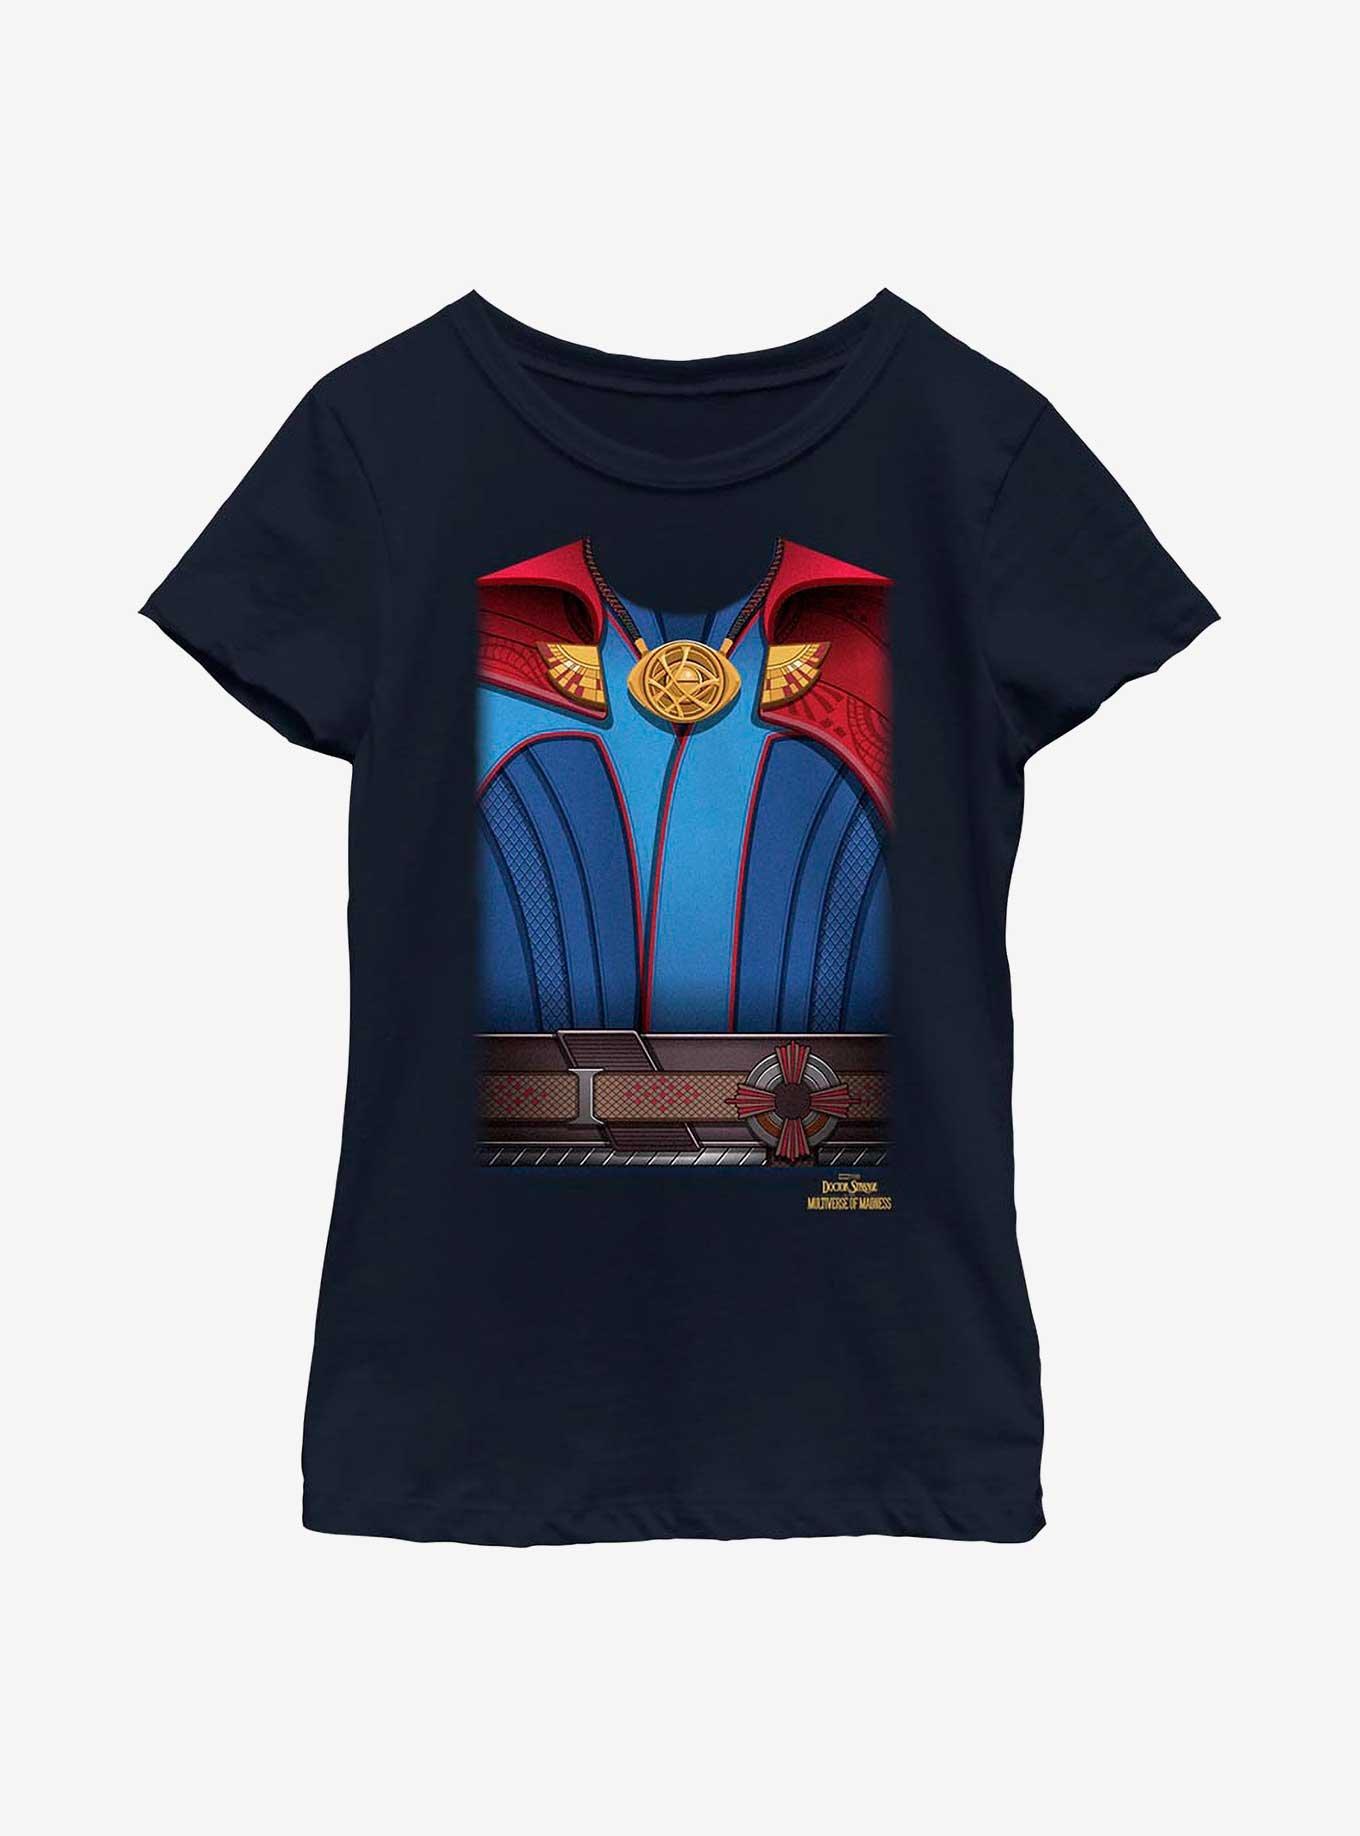 Marvel Doctor Strange In The Multiverse Of Madness Costume Shirt Youth Girls T-Shirt, NAVY, hi-res